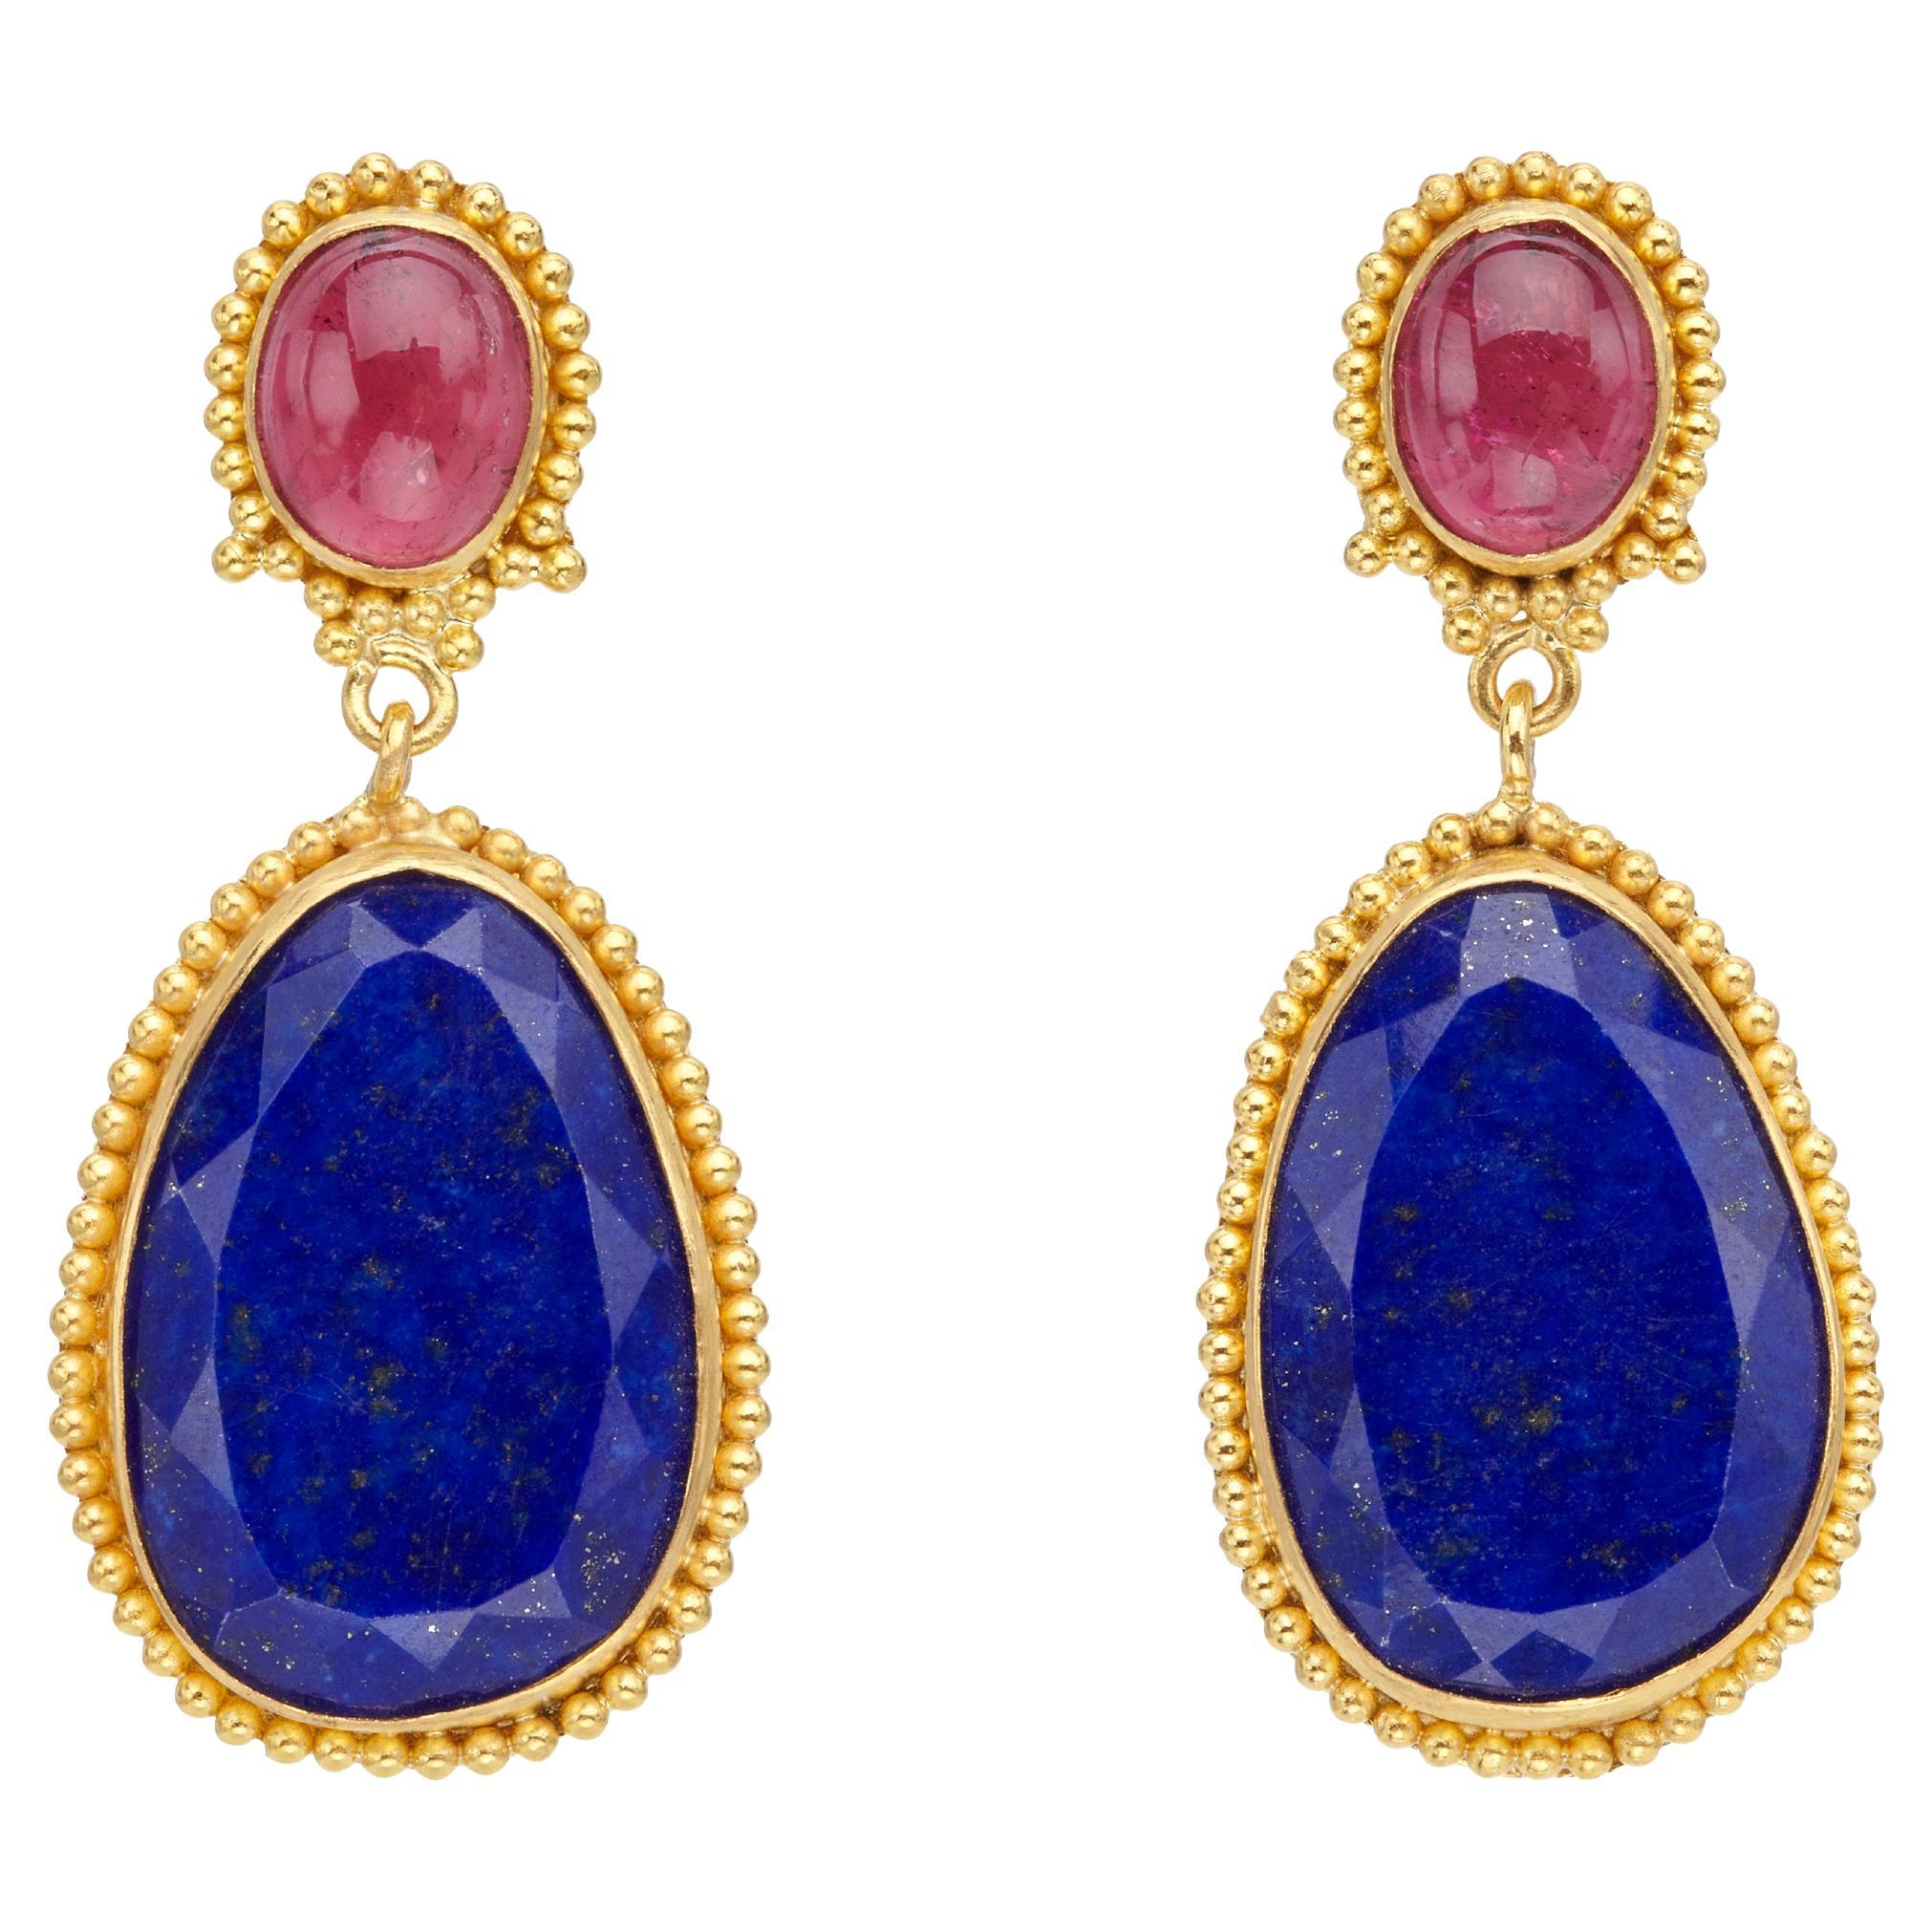 Gold Beaded Earrings in 22kt Yellow Gold with Blue Lapis Lazuli and Tourmaline